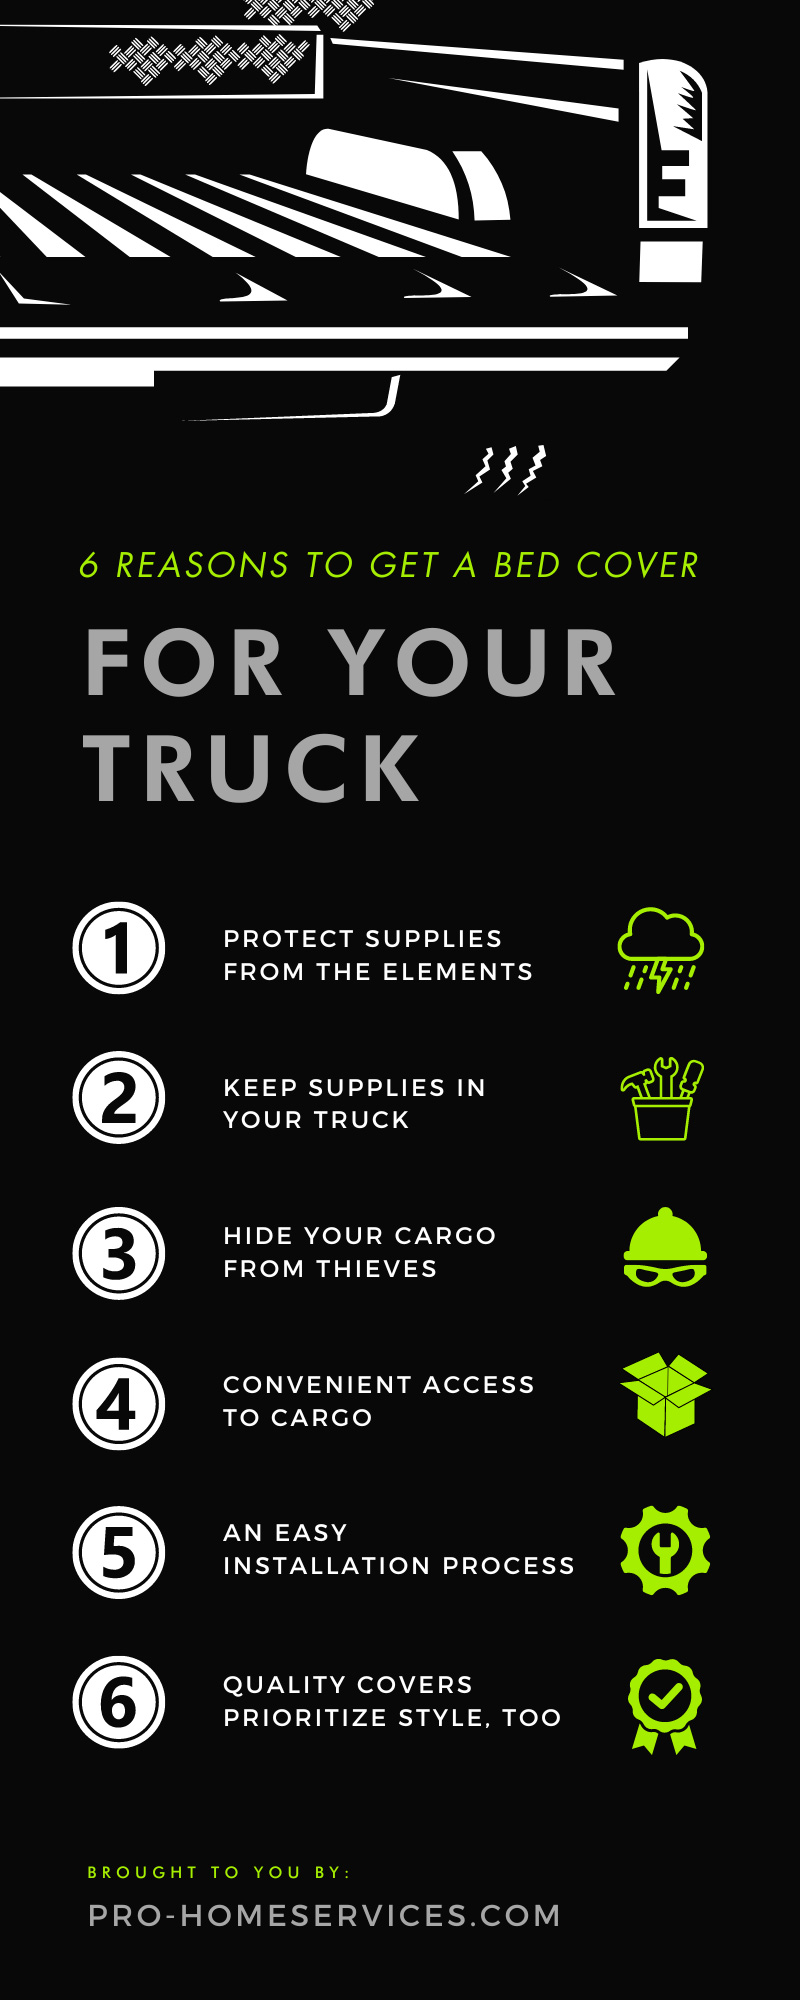 6 Reasons To Get a Bed Cover for Your Truck